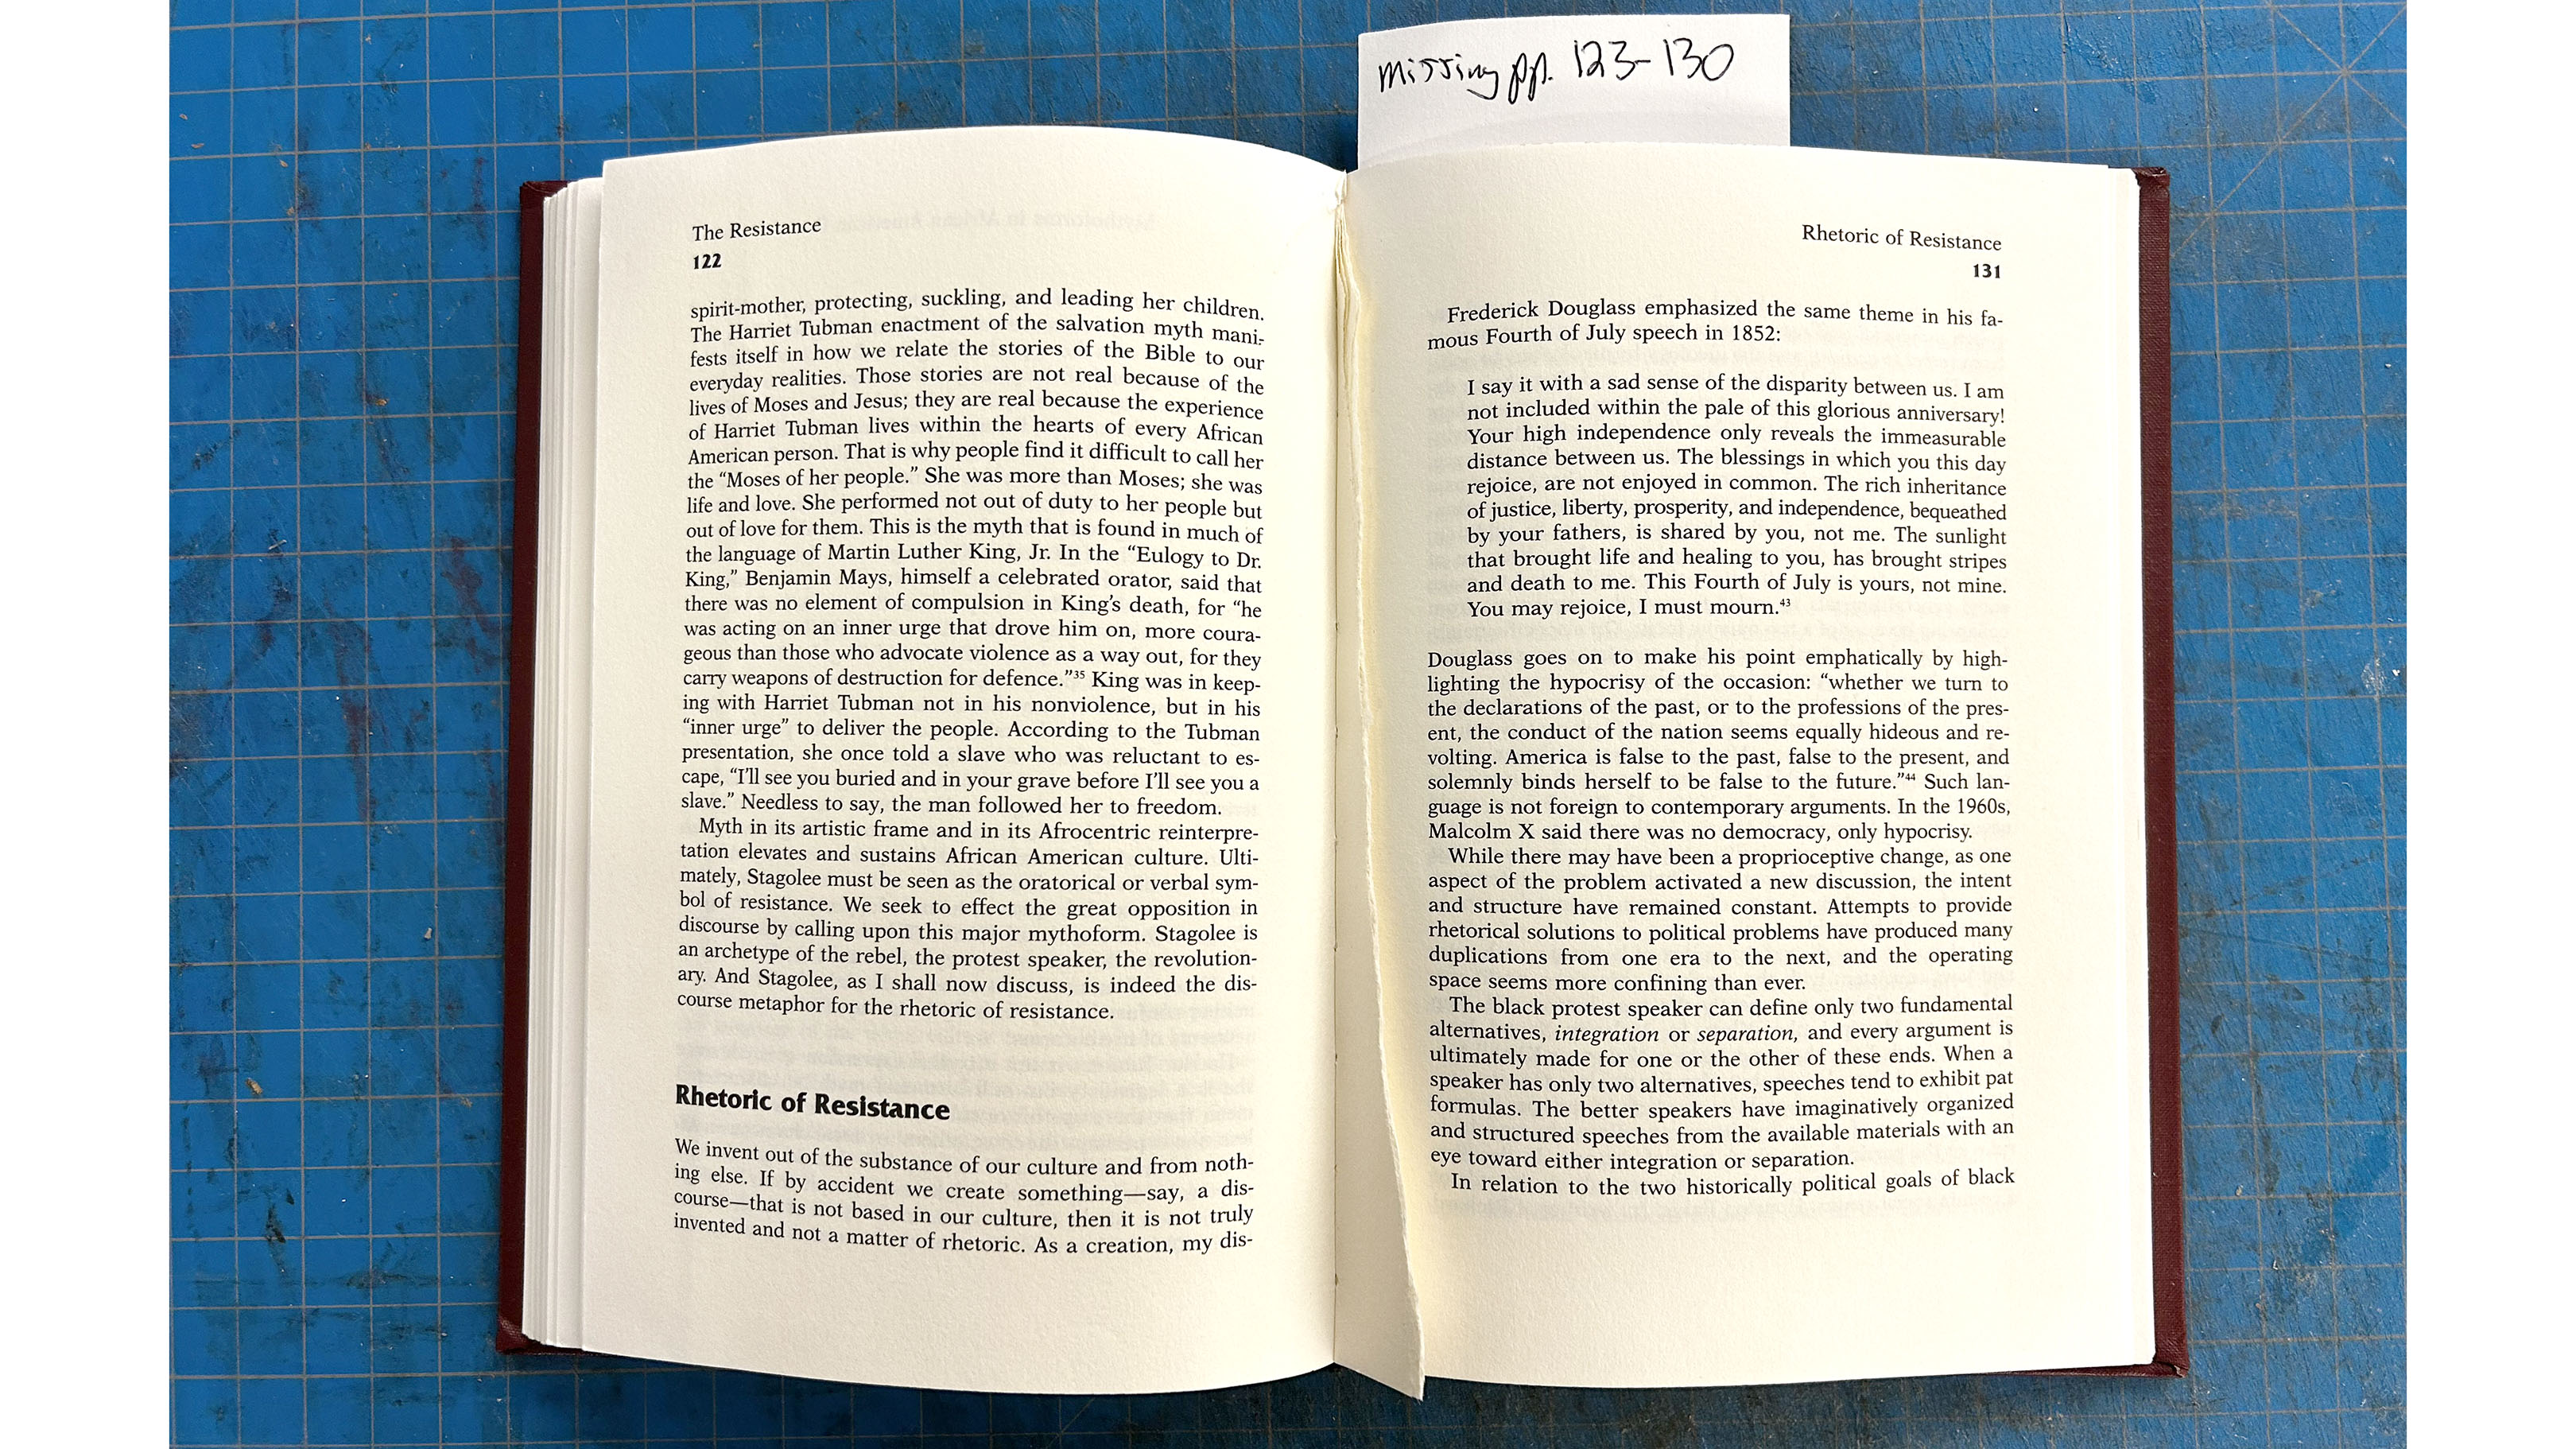 A damaged book has been sent to Preservation because multiple pages were torn out.